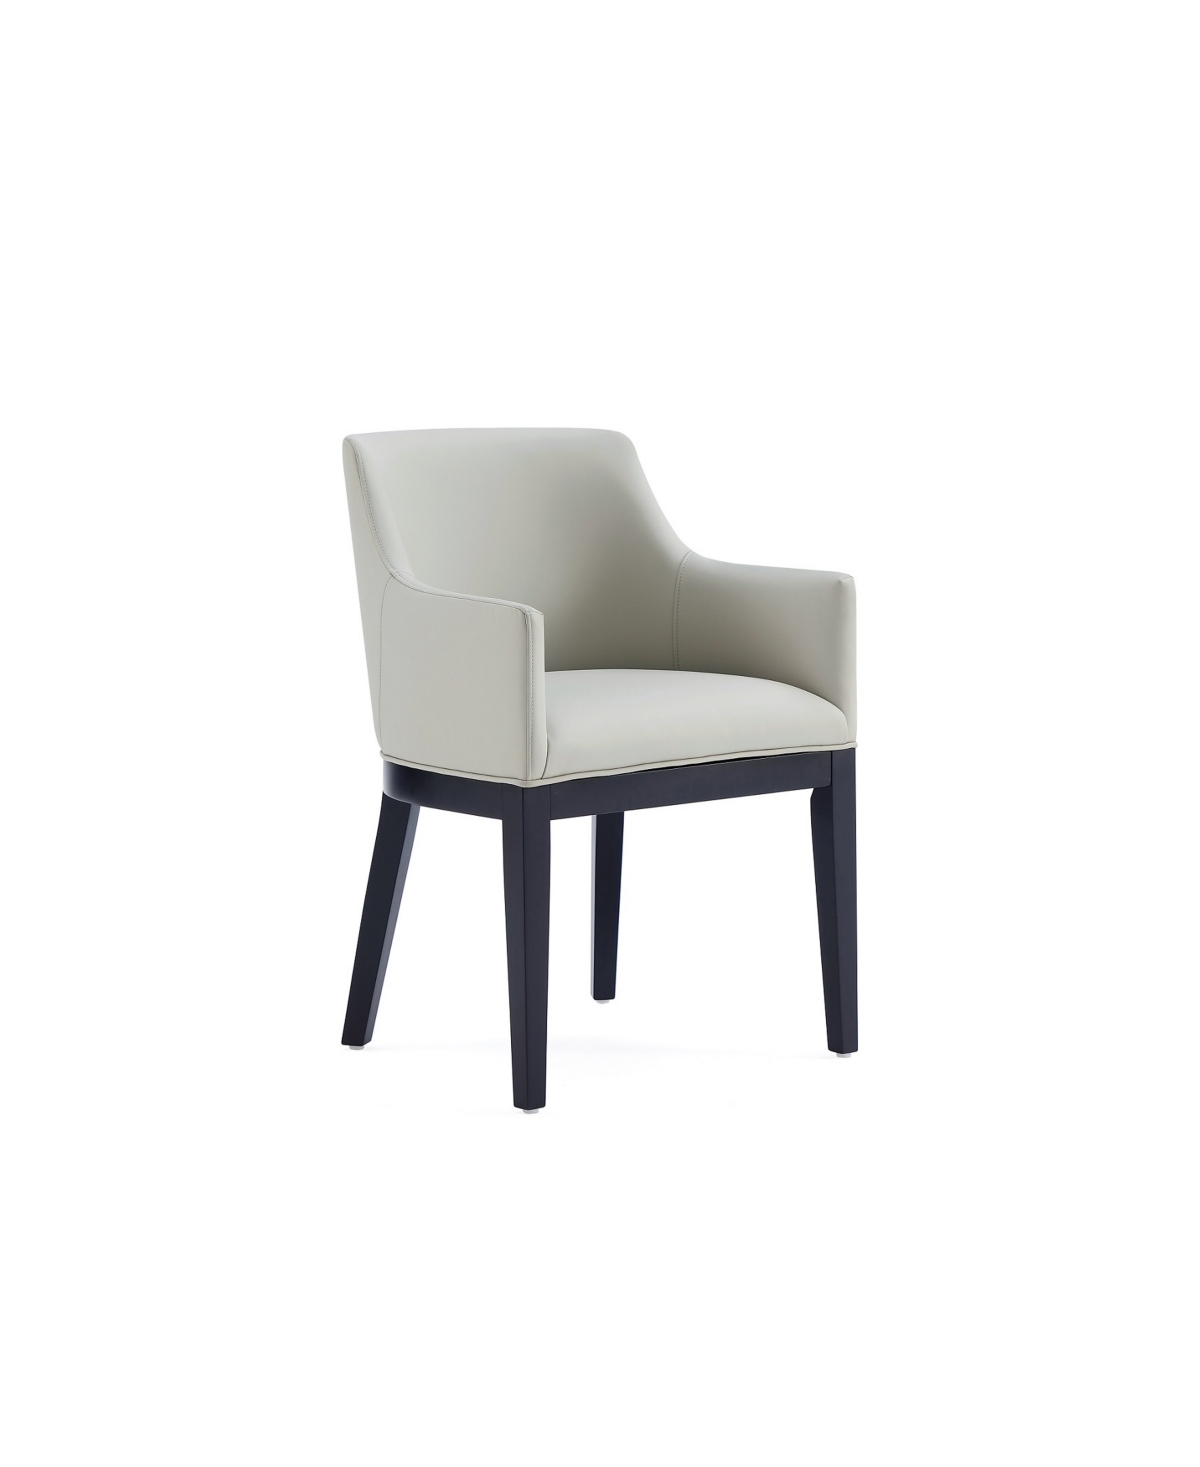 Manhattan Comfort Gansevoort 22.5" L Beech Wood Faux Leather Upholstered Dining Armchair In Stone Gray